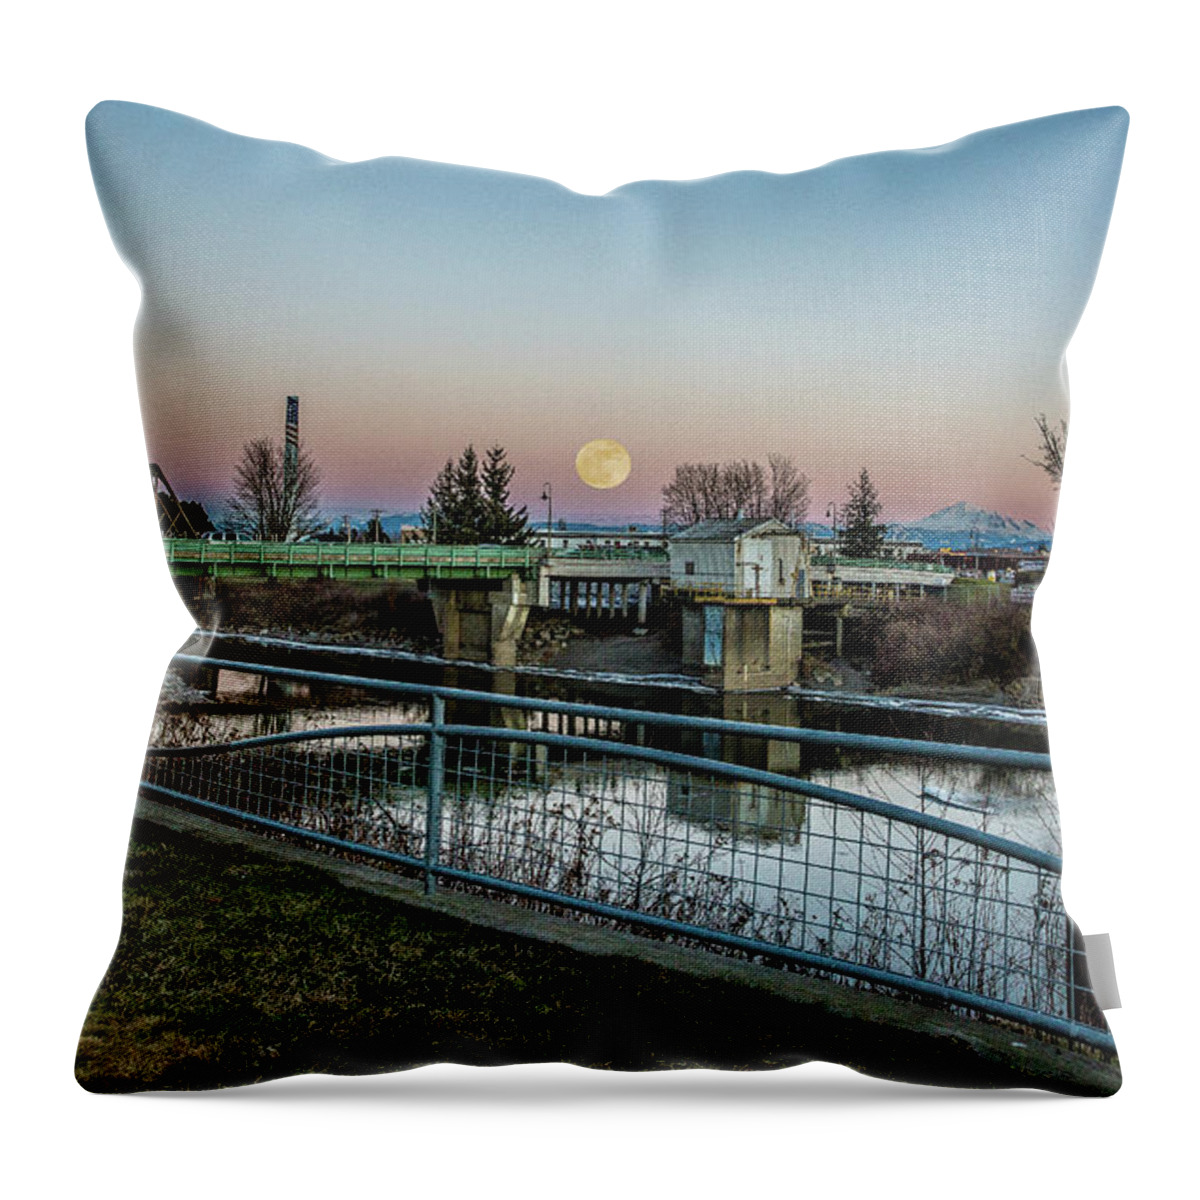 Full Moon Throw Pillow featuring the photograph Full Moon Over The Nooksack by Mark Joseph